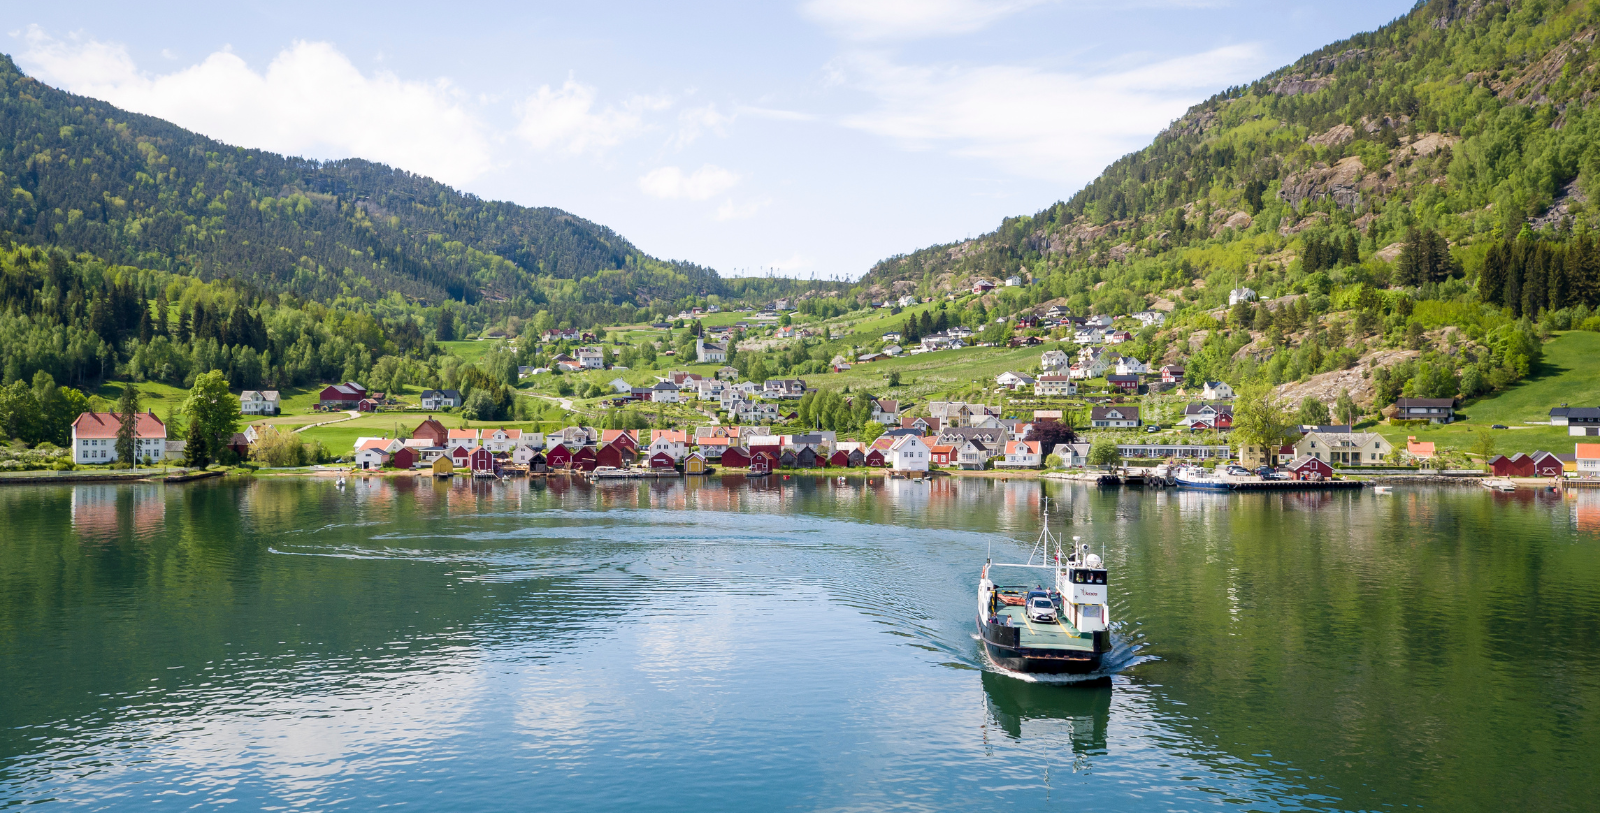 Uncover the natural beauty and rich culture of the country’s Luster municipality, which stretches along the inner branch of Norway’s longest and deepest fjord.